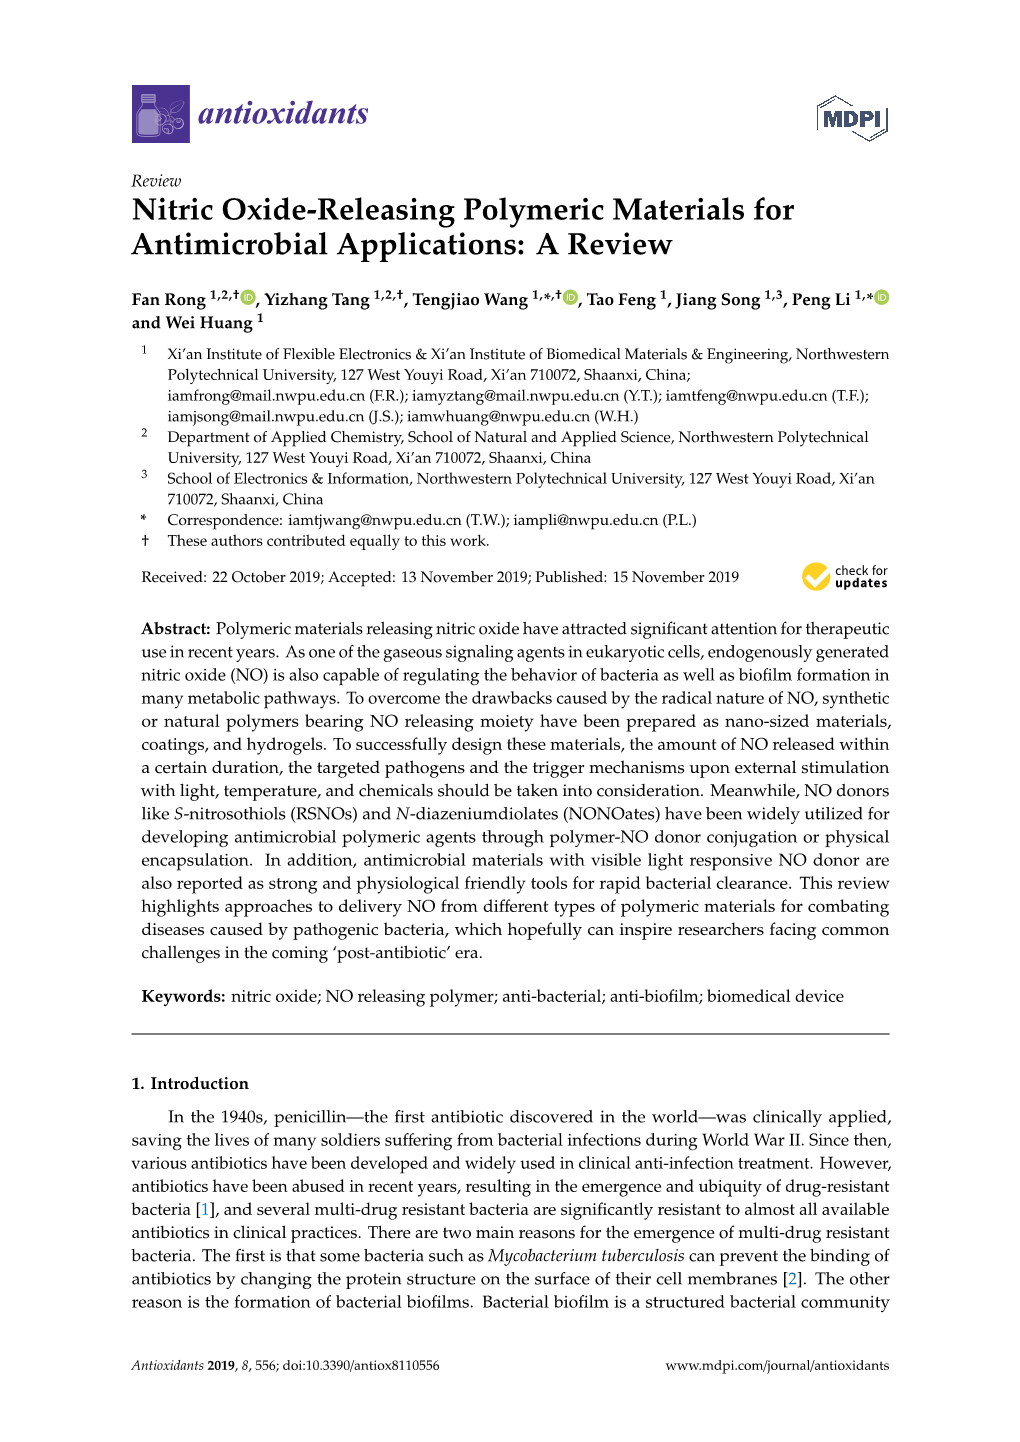 Nitric Oxide-Releasing Polymeric Materials for Antimicrobial Applications: a Review